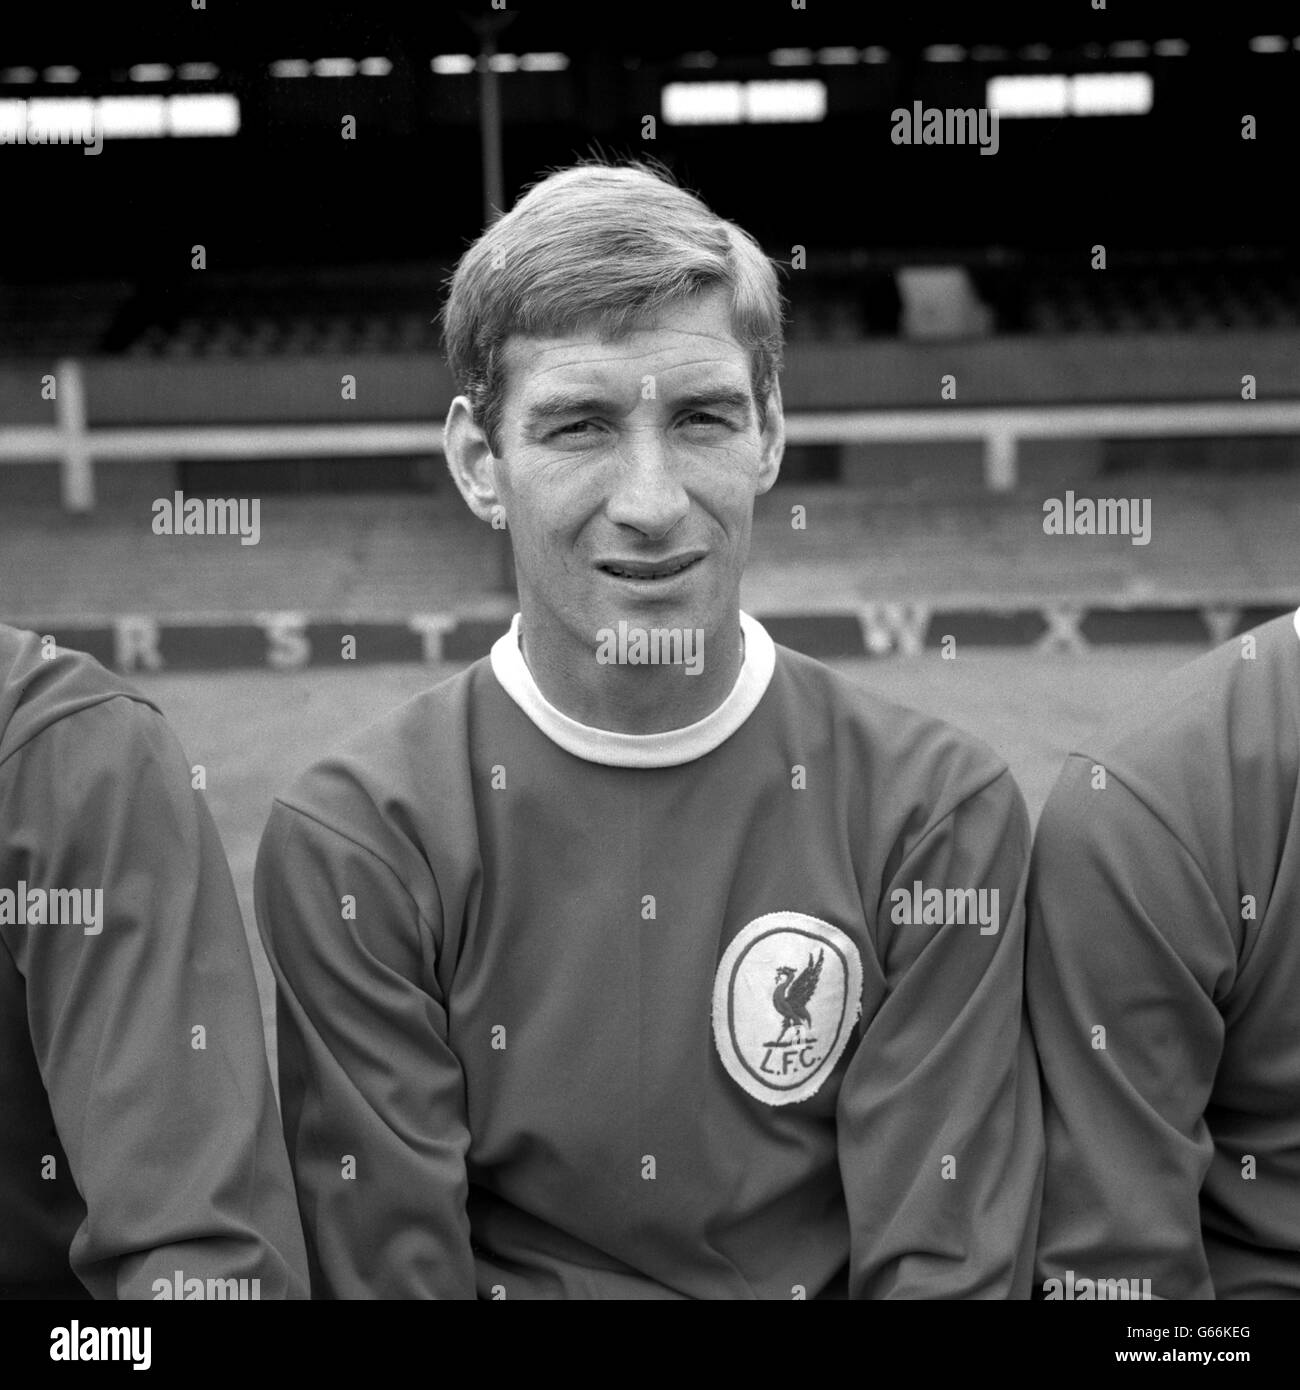 Football - Liverpool Photocall - Anfield. Geoff Strong, Liverpool. Banque D'Images